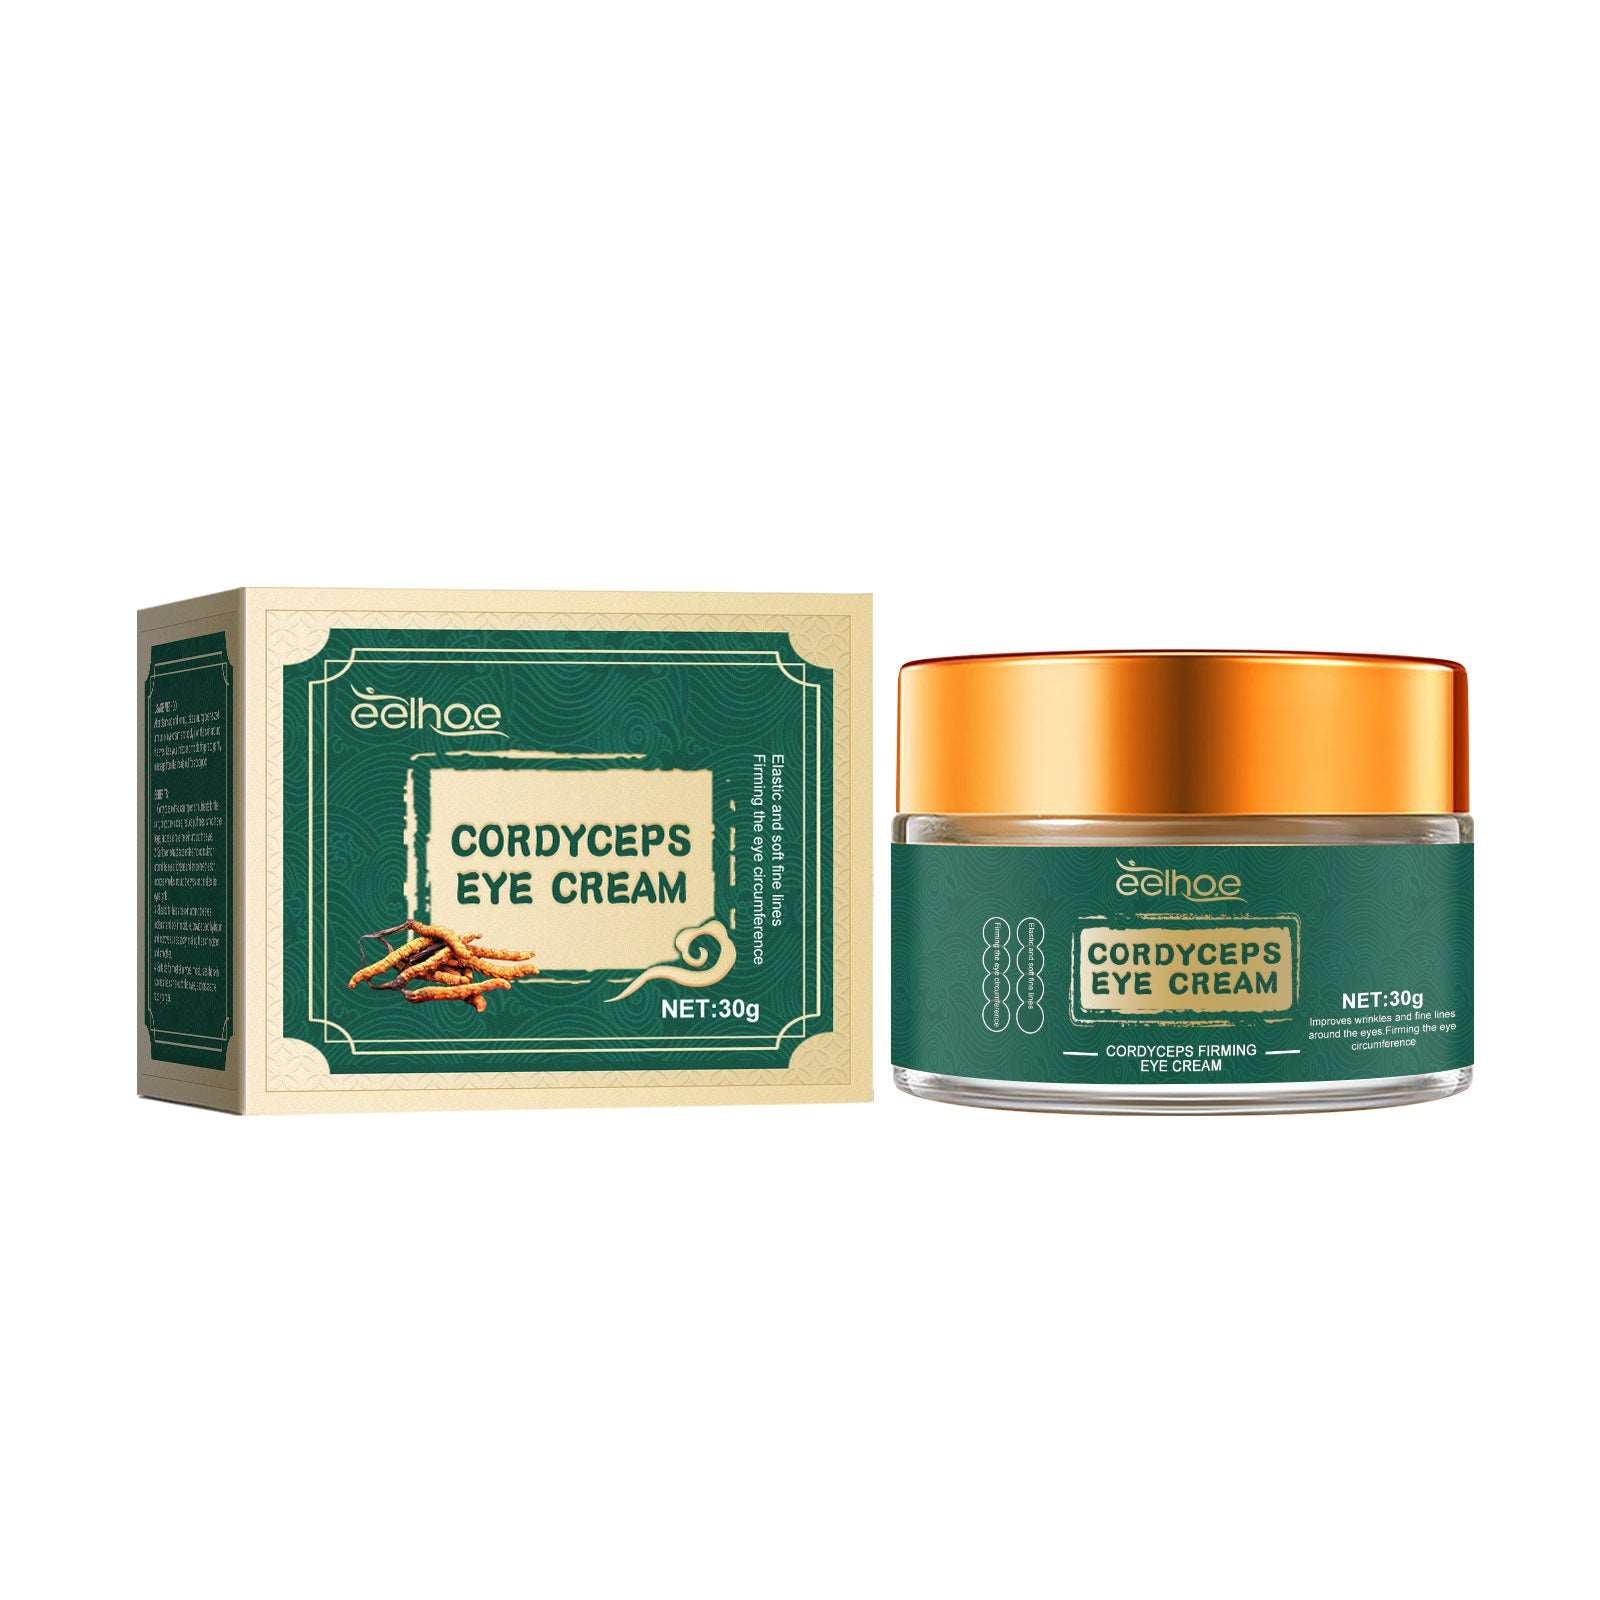 Product packaging and jar of Sweet Deals Cordyceps Eye Cream Fade Bags And Dark Circle Fine Lines, featuring a green and gold box beside an orange and green cream jar, both labeled with product details including Cordyceps Extract.